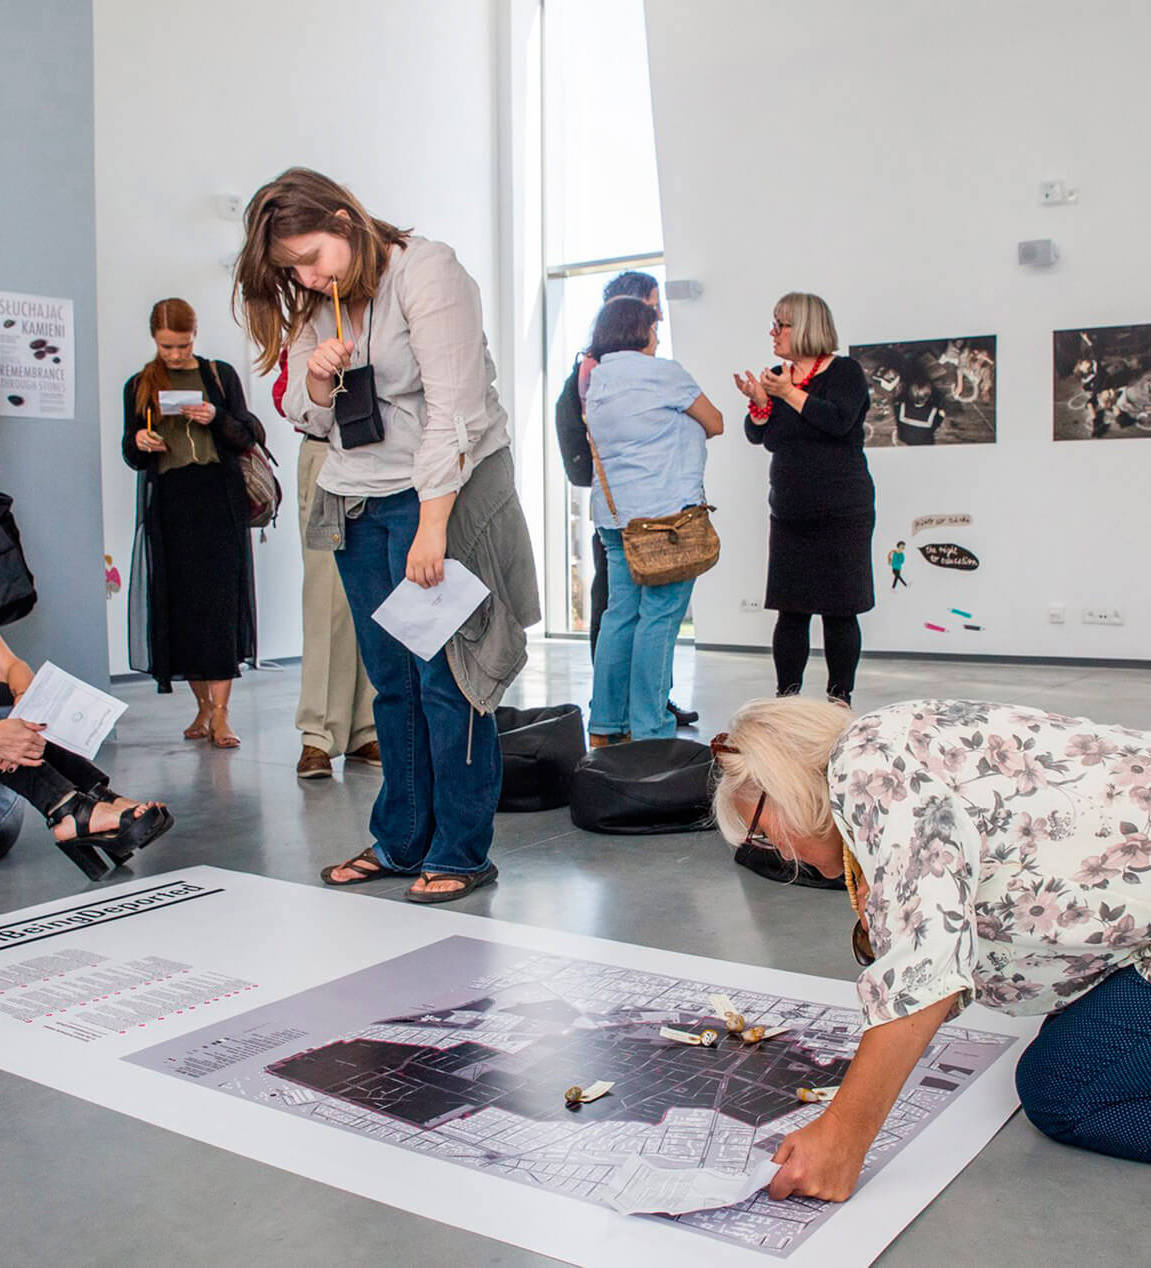 People at a workshop discussing the work with the artist and observing a map on the floor